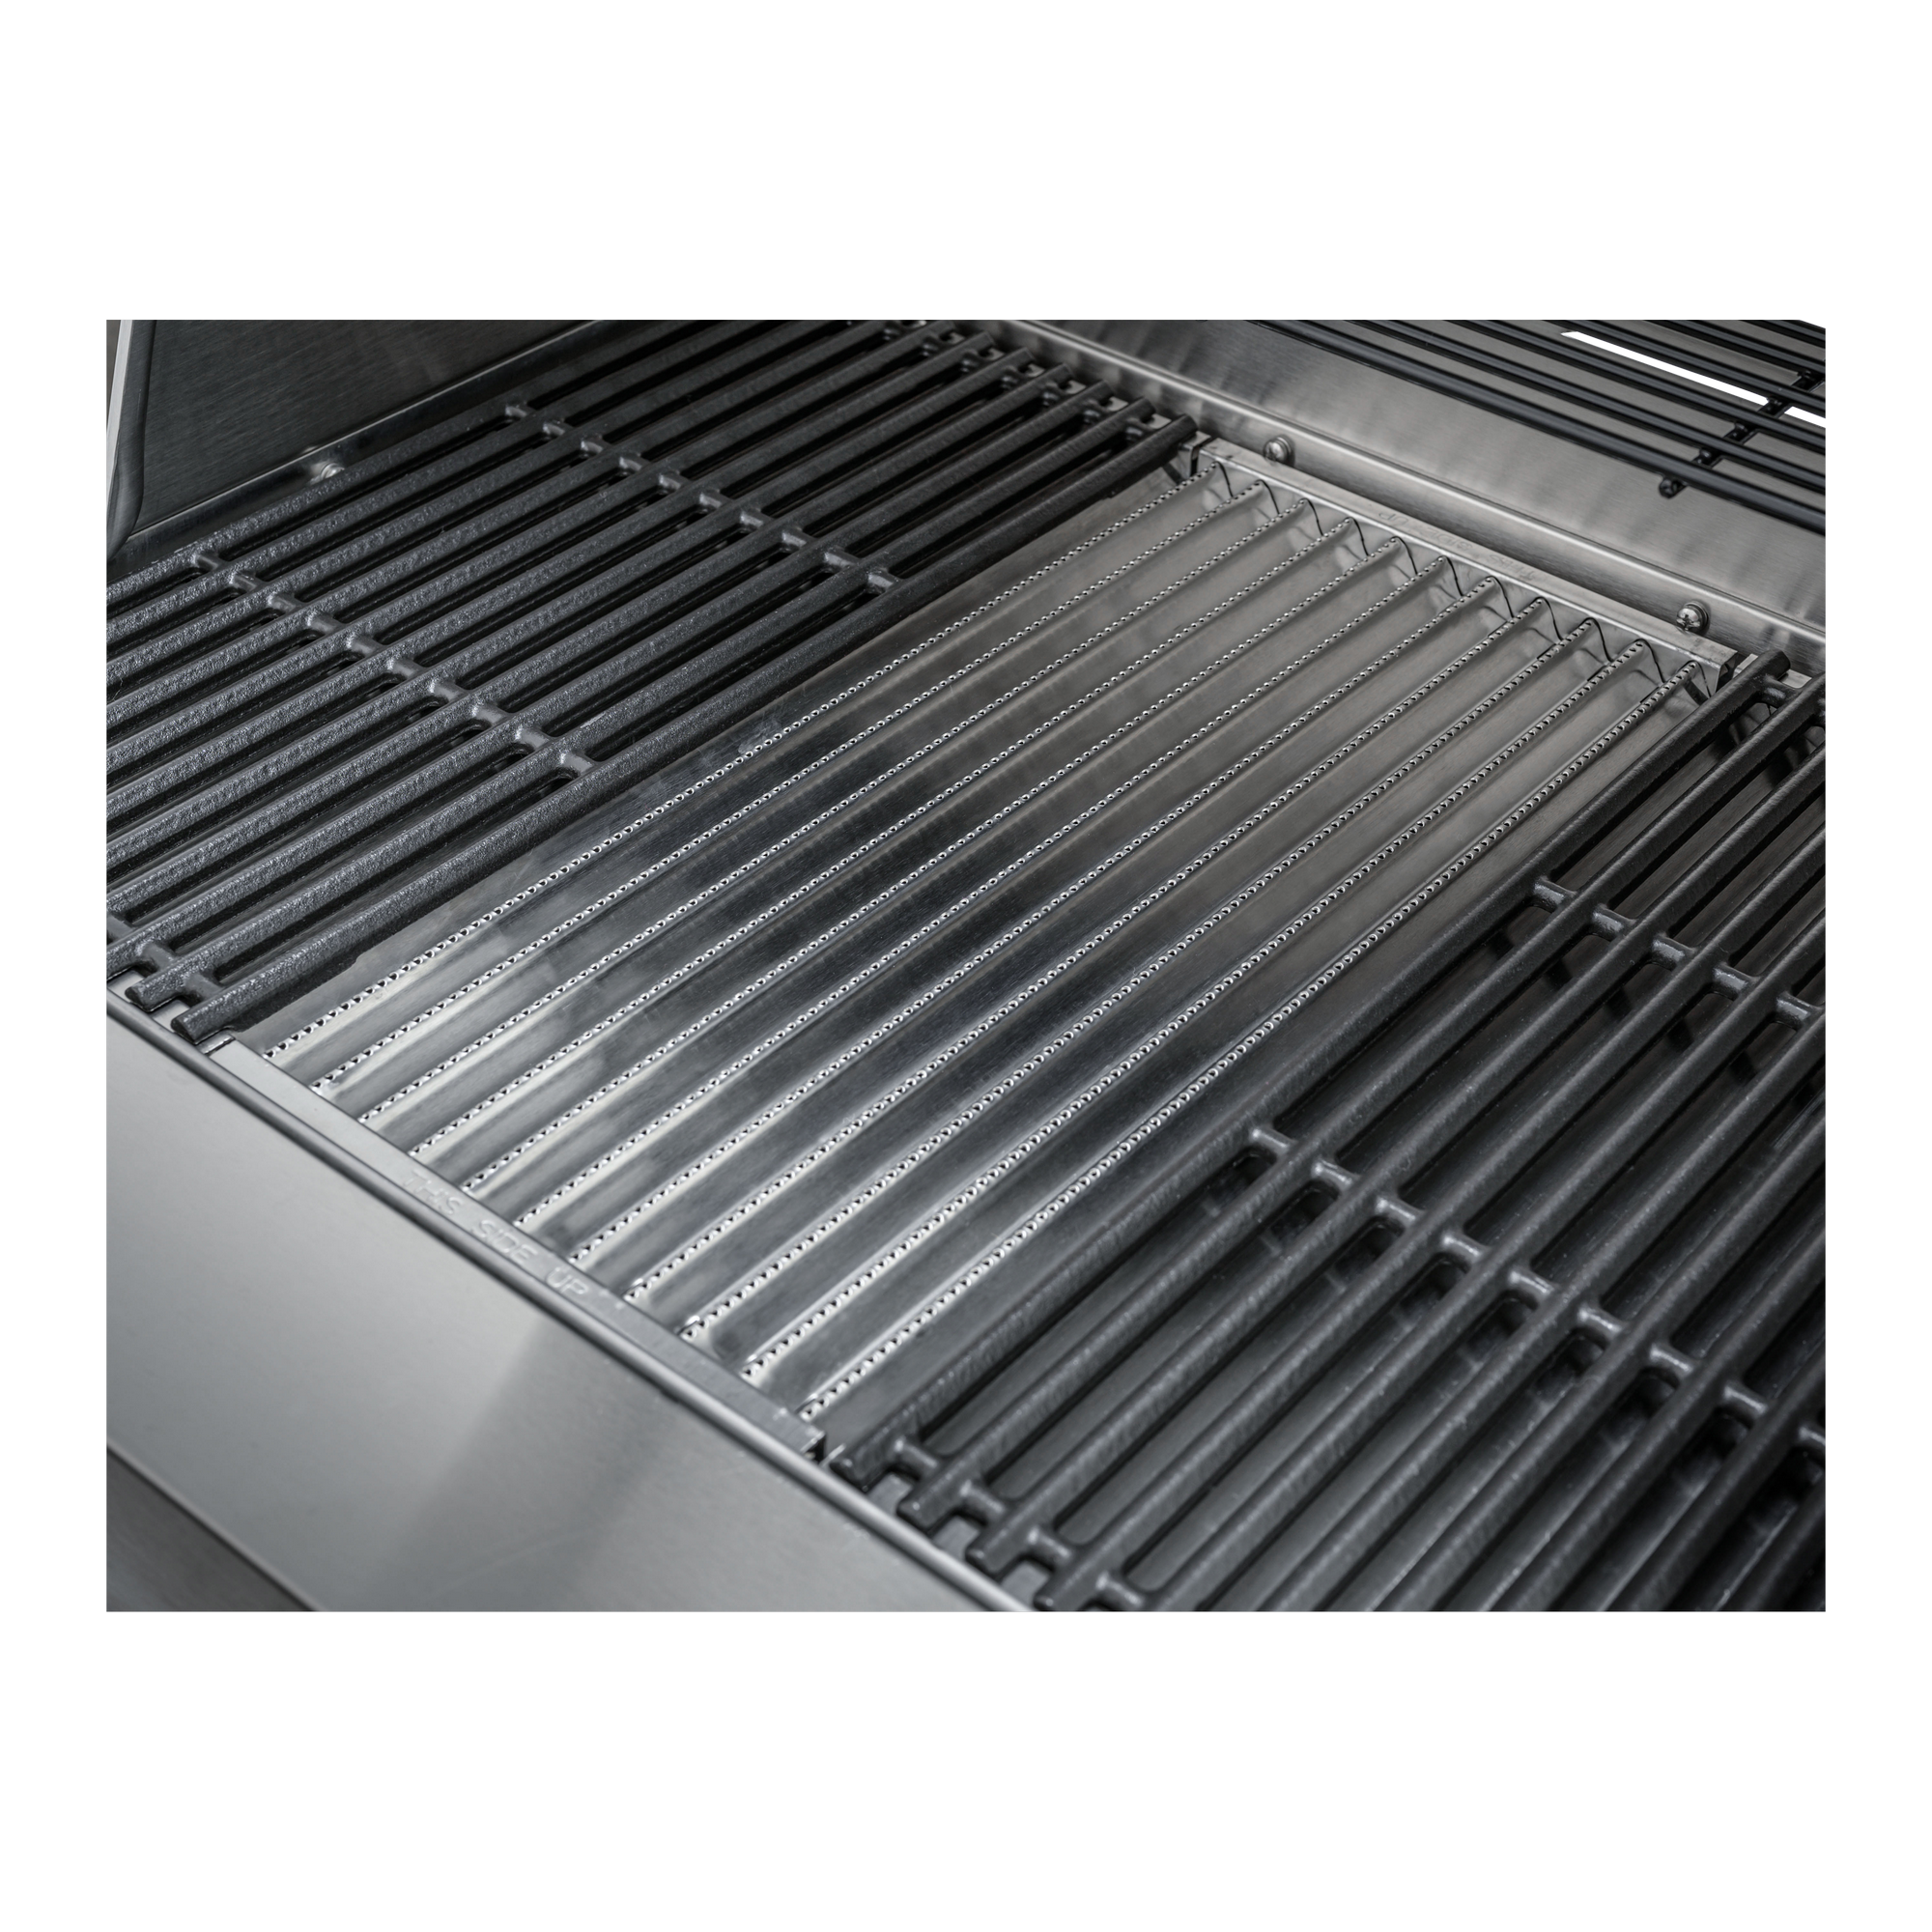 Gasgrill 'Ultimate 3200' 3 Brenner, Edelstahl, 120 x 100,3 x 67,3 cm + product picture